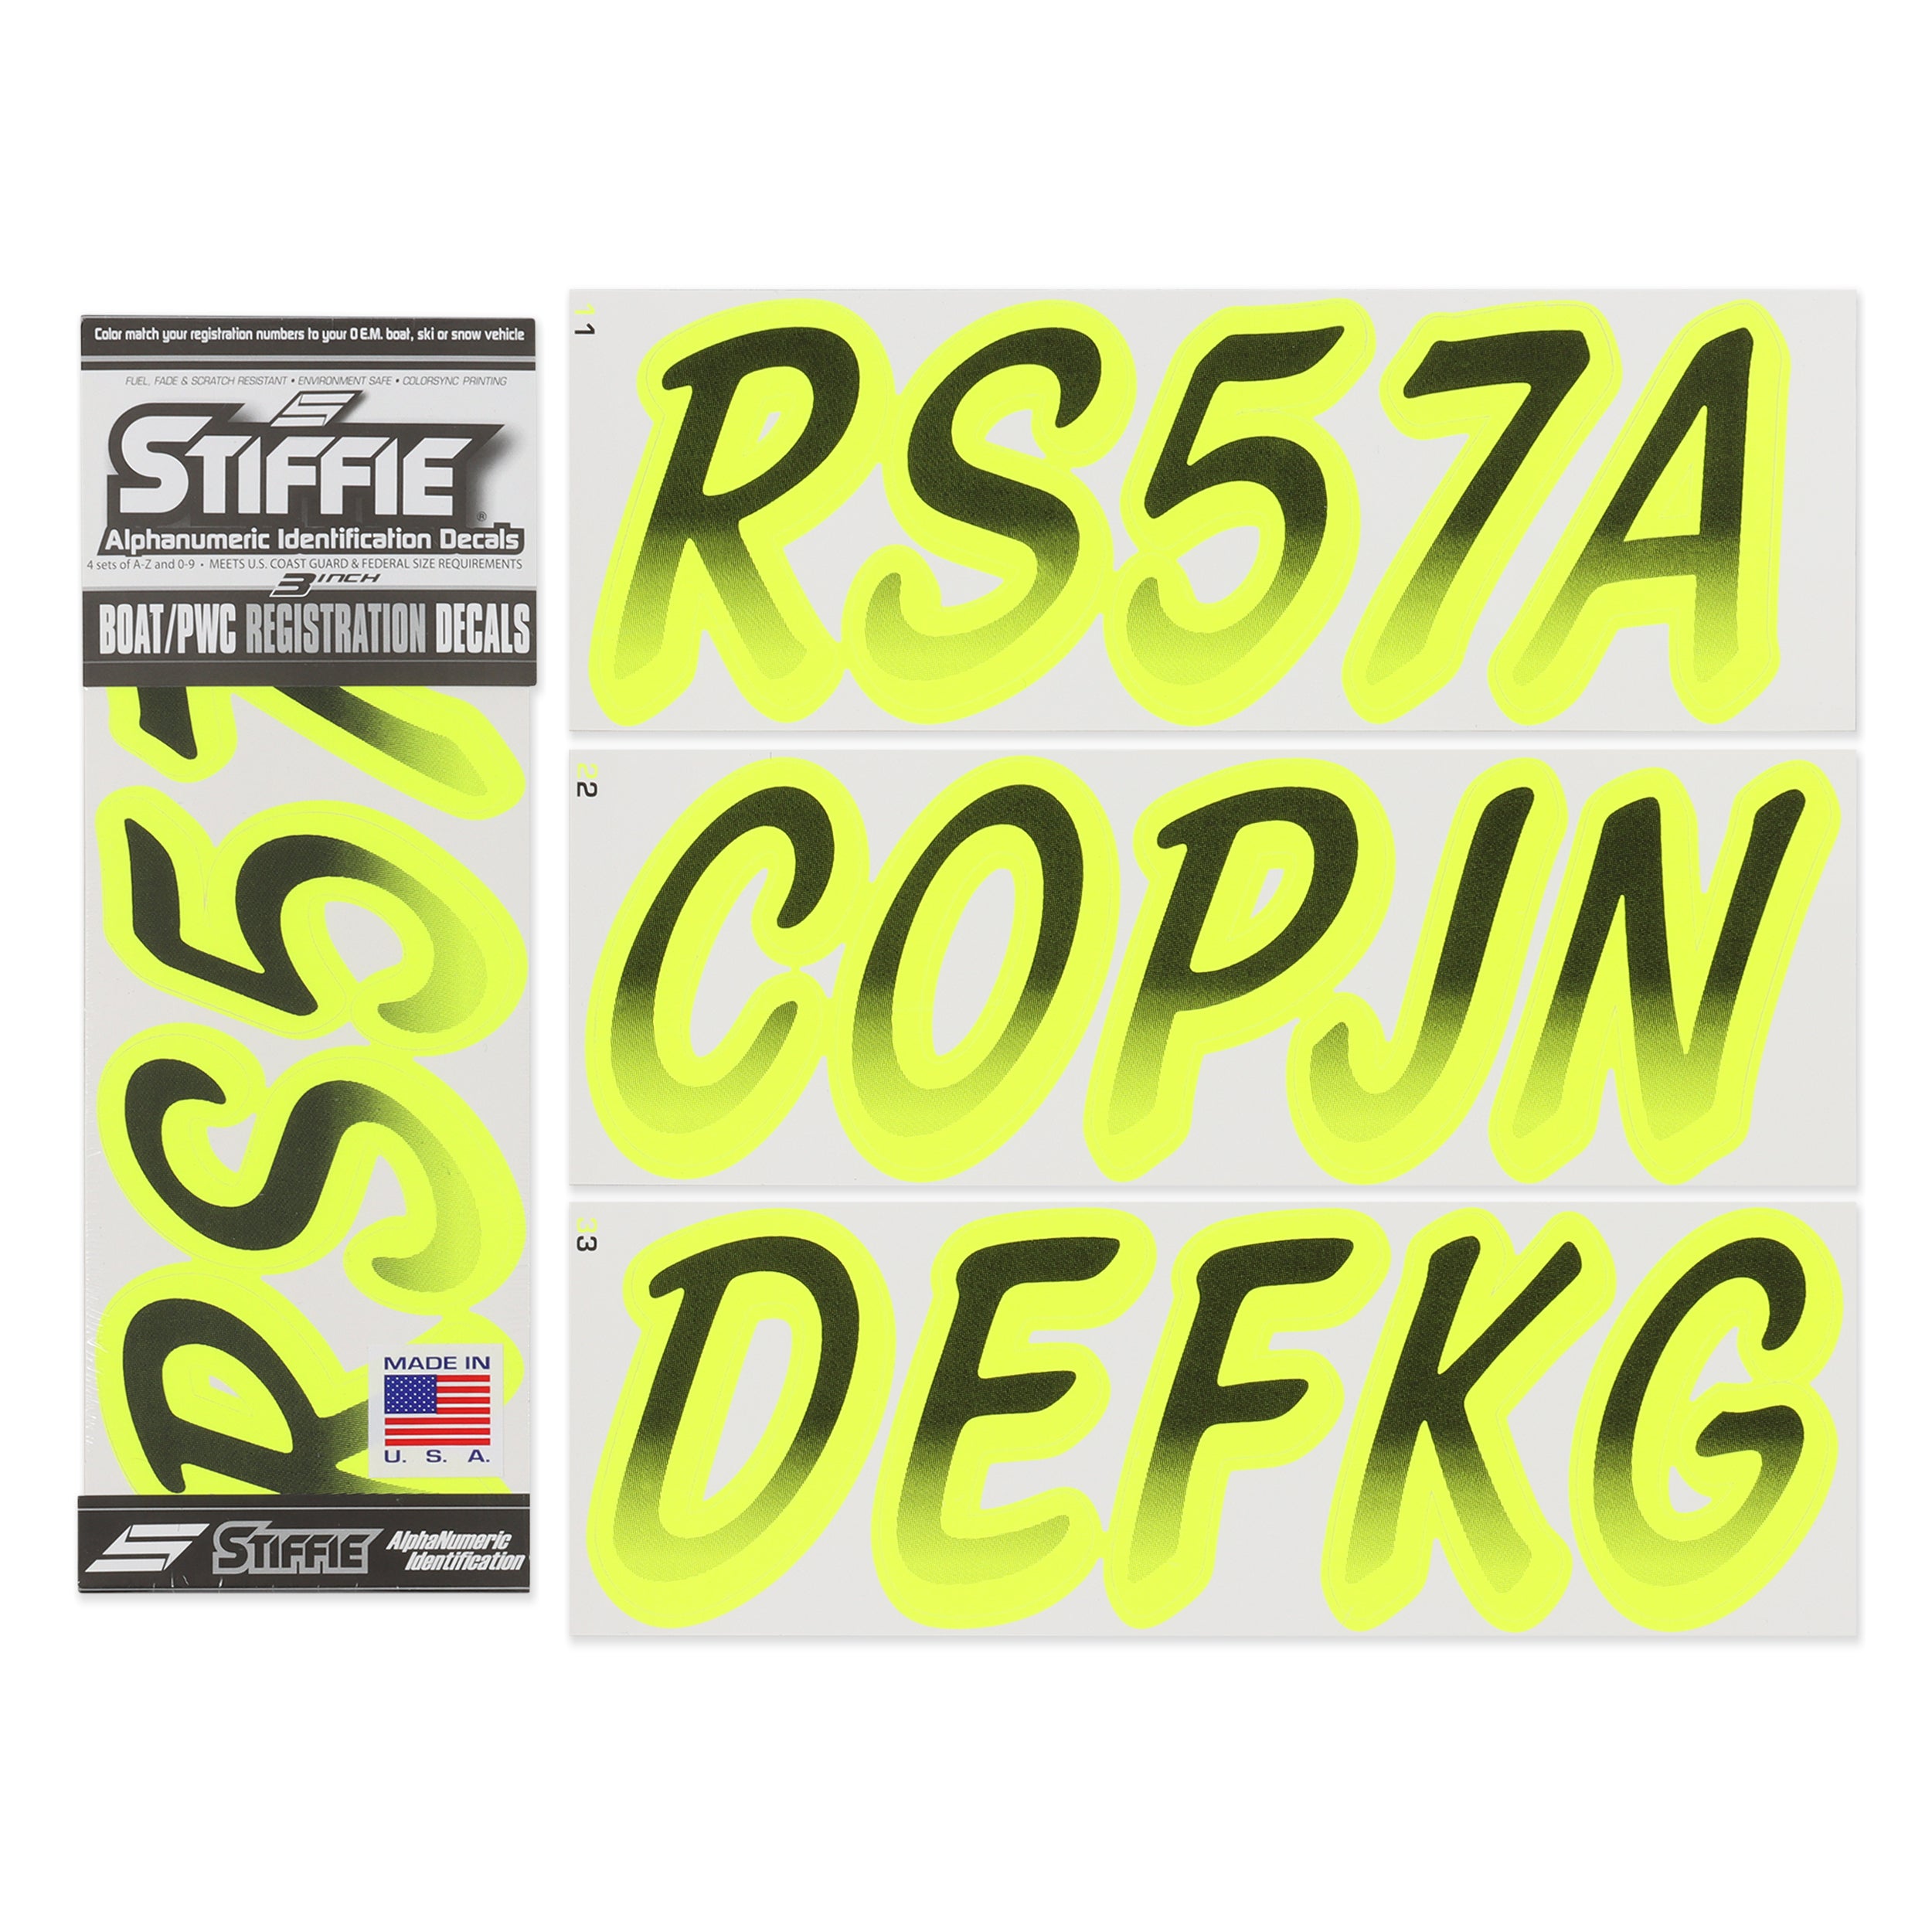 STIFFIE Whipline Black/Day Glow Yellow 3" Alpha-Numeric Registration Identification Numbers Stickers Decals for Boats & Personal Watercraft